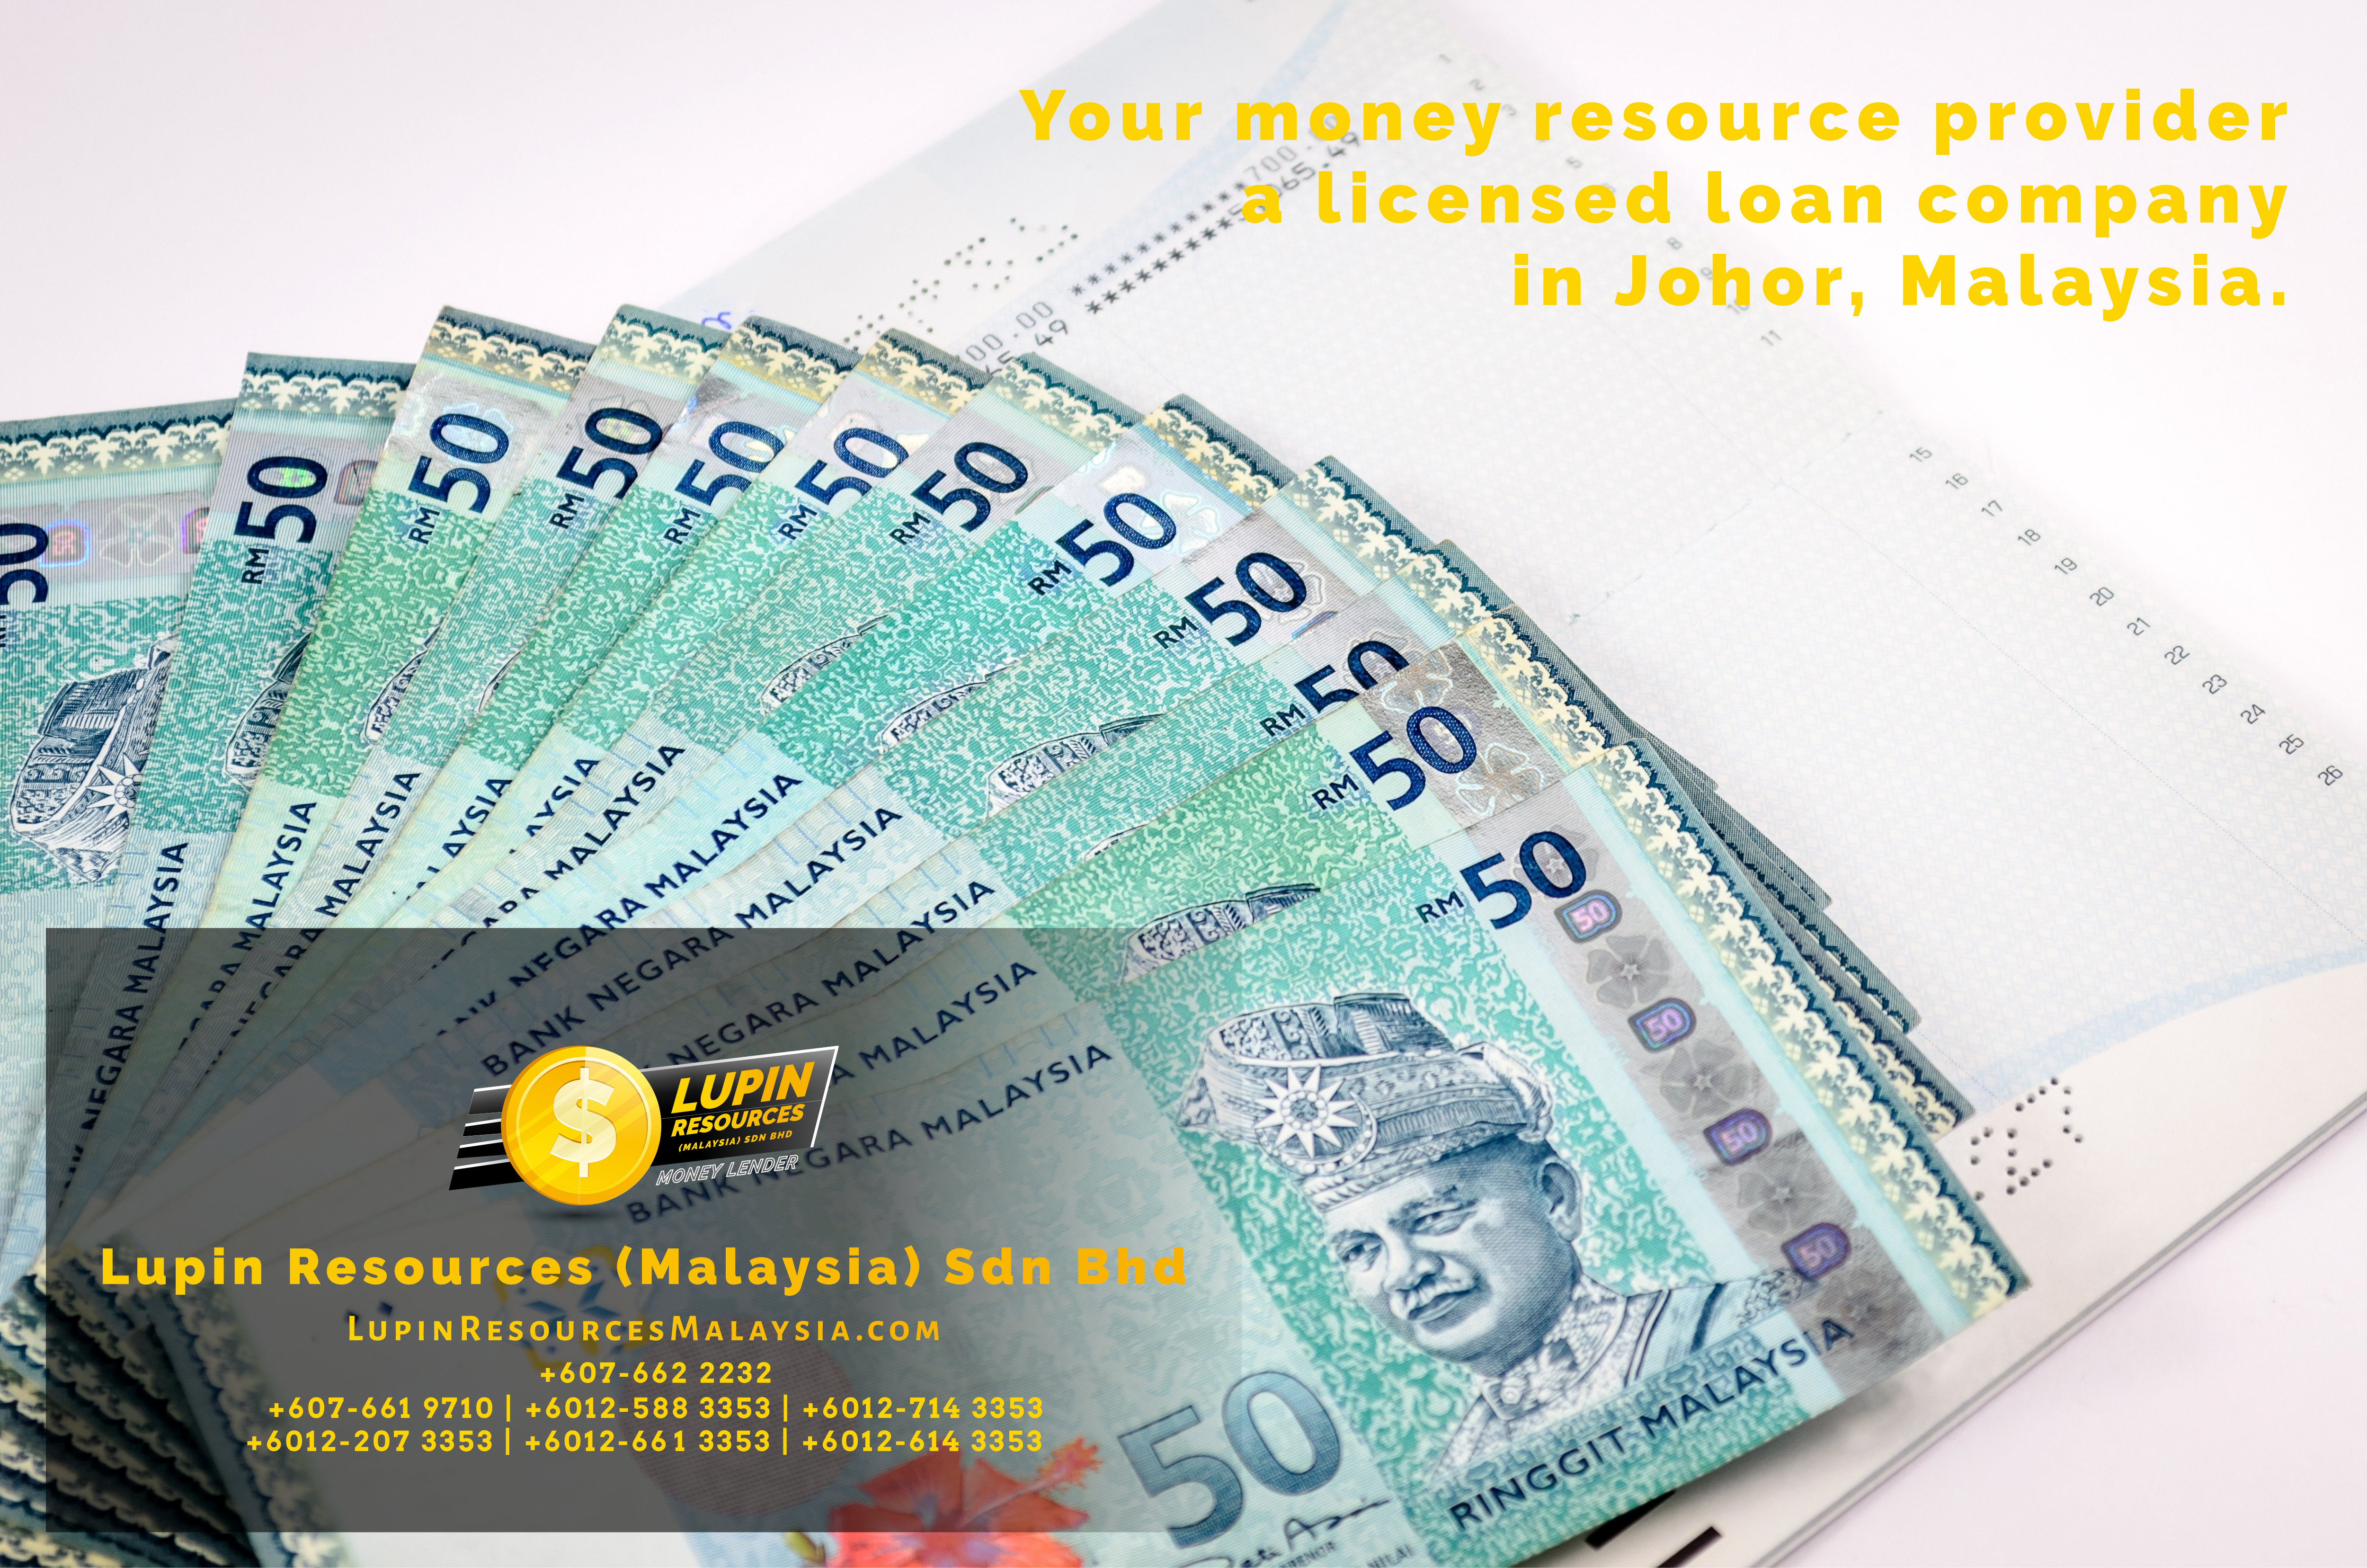 Johor Licensed Loan Company Licensed Money Lender Lupin Resources Malaysia SDN BHD Your money resource provider Kulai Johor Bahru Johor Malaysia Business Loan A01-13